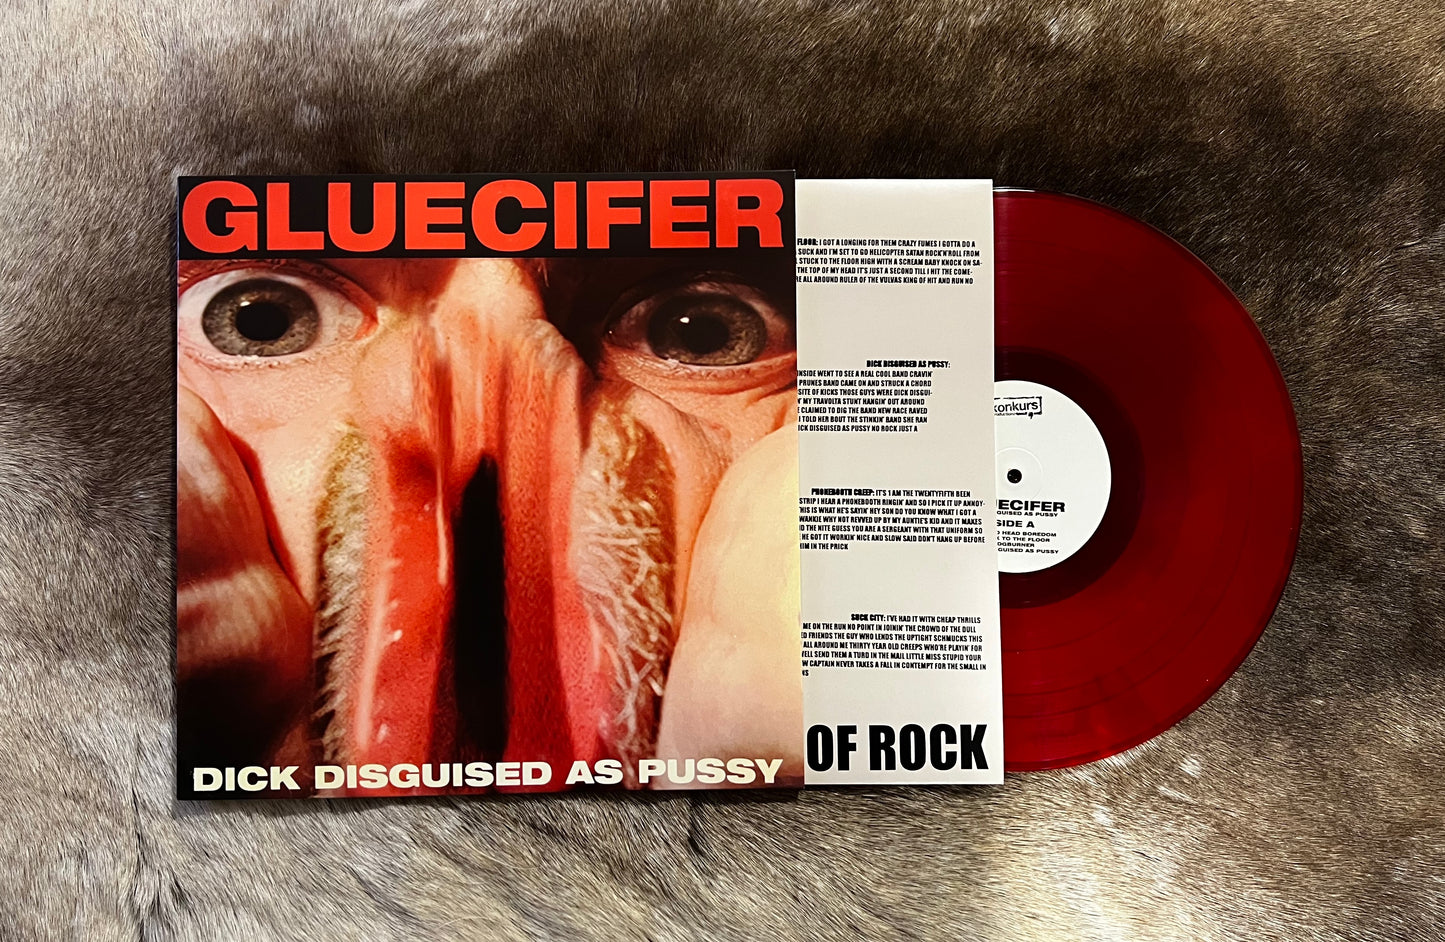 Gluecifer - Dick Disguised As Pussy 12" Red Clear Vinyl